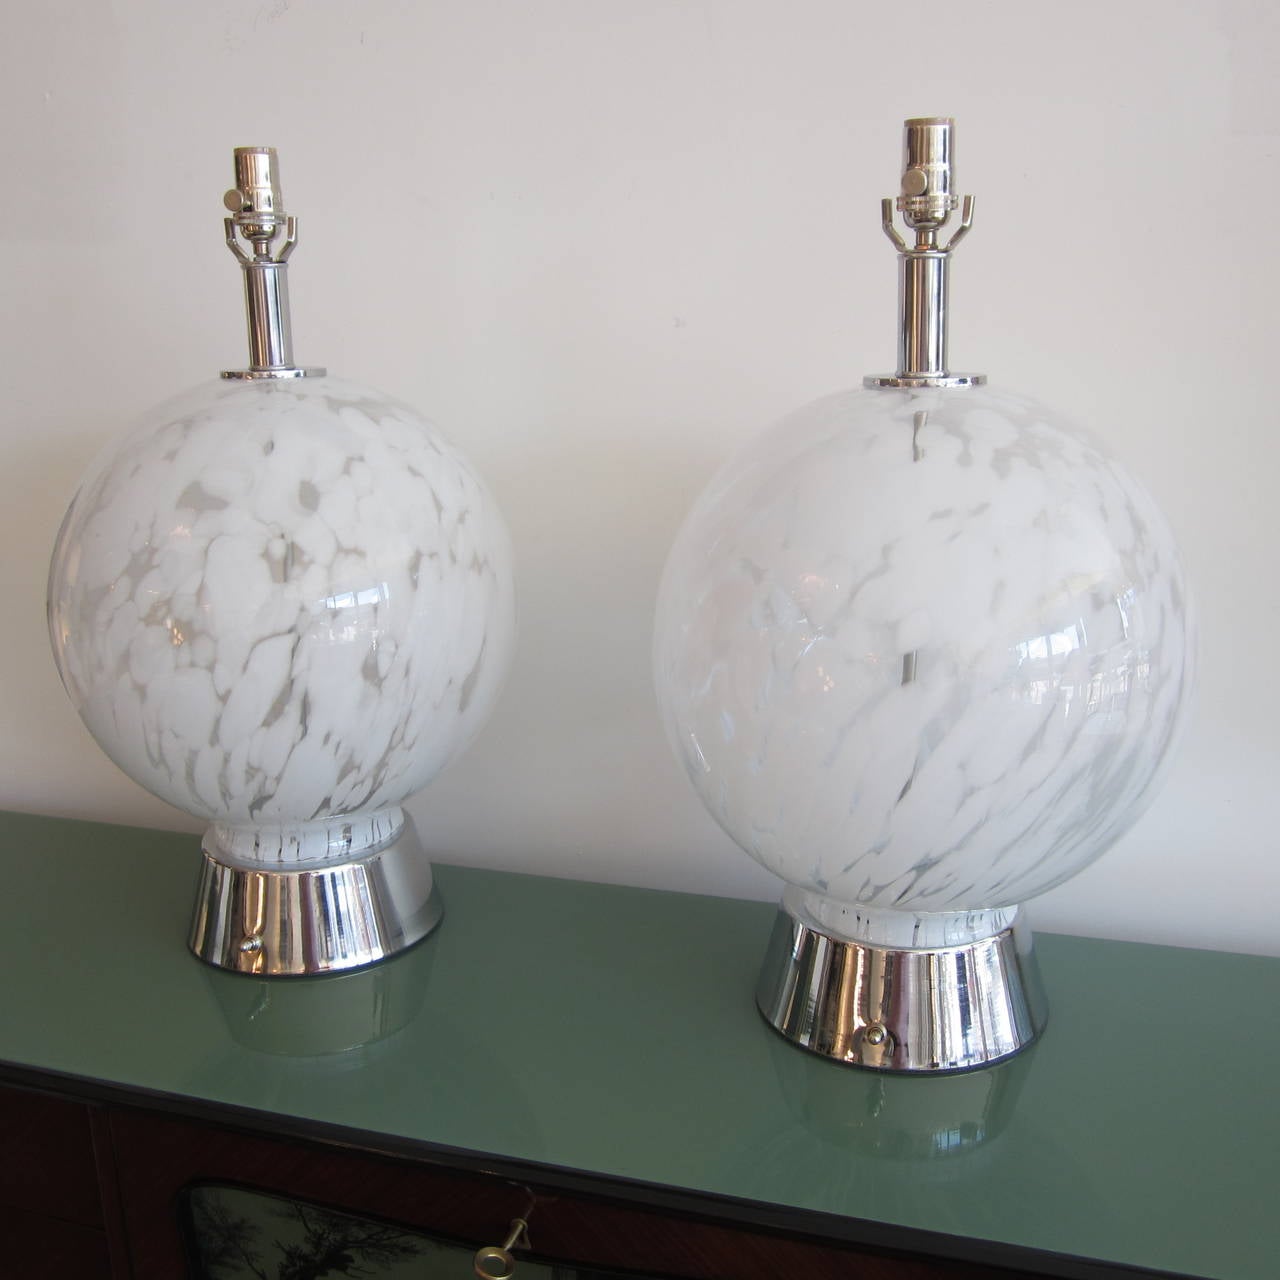 Pair of Vistosi handblown Murano glass sphere lamps with chrome bases and appointments. Rewired.